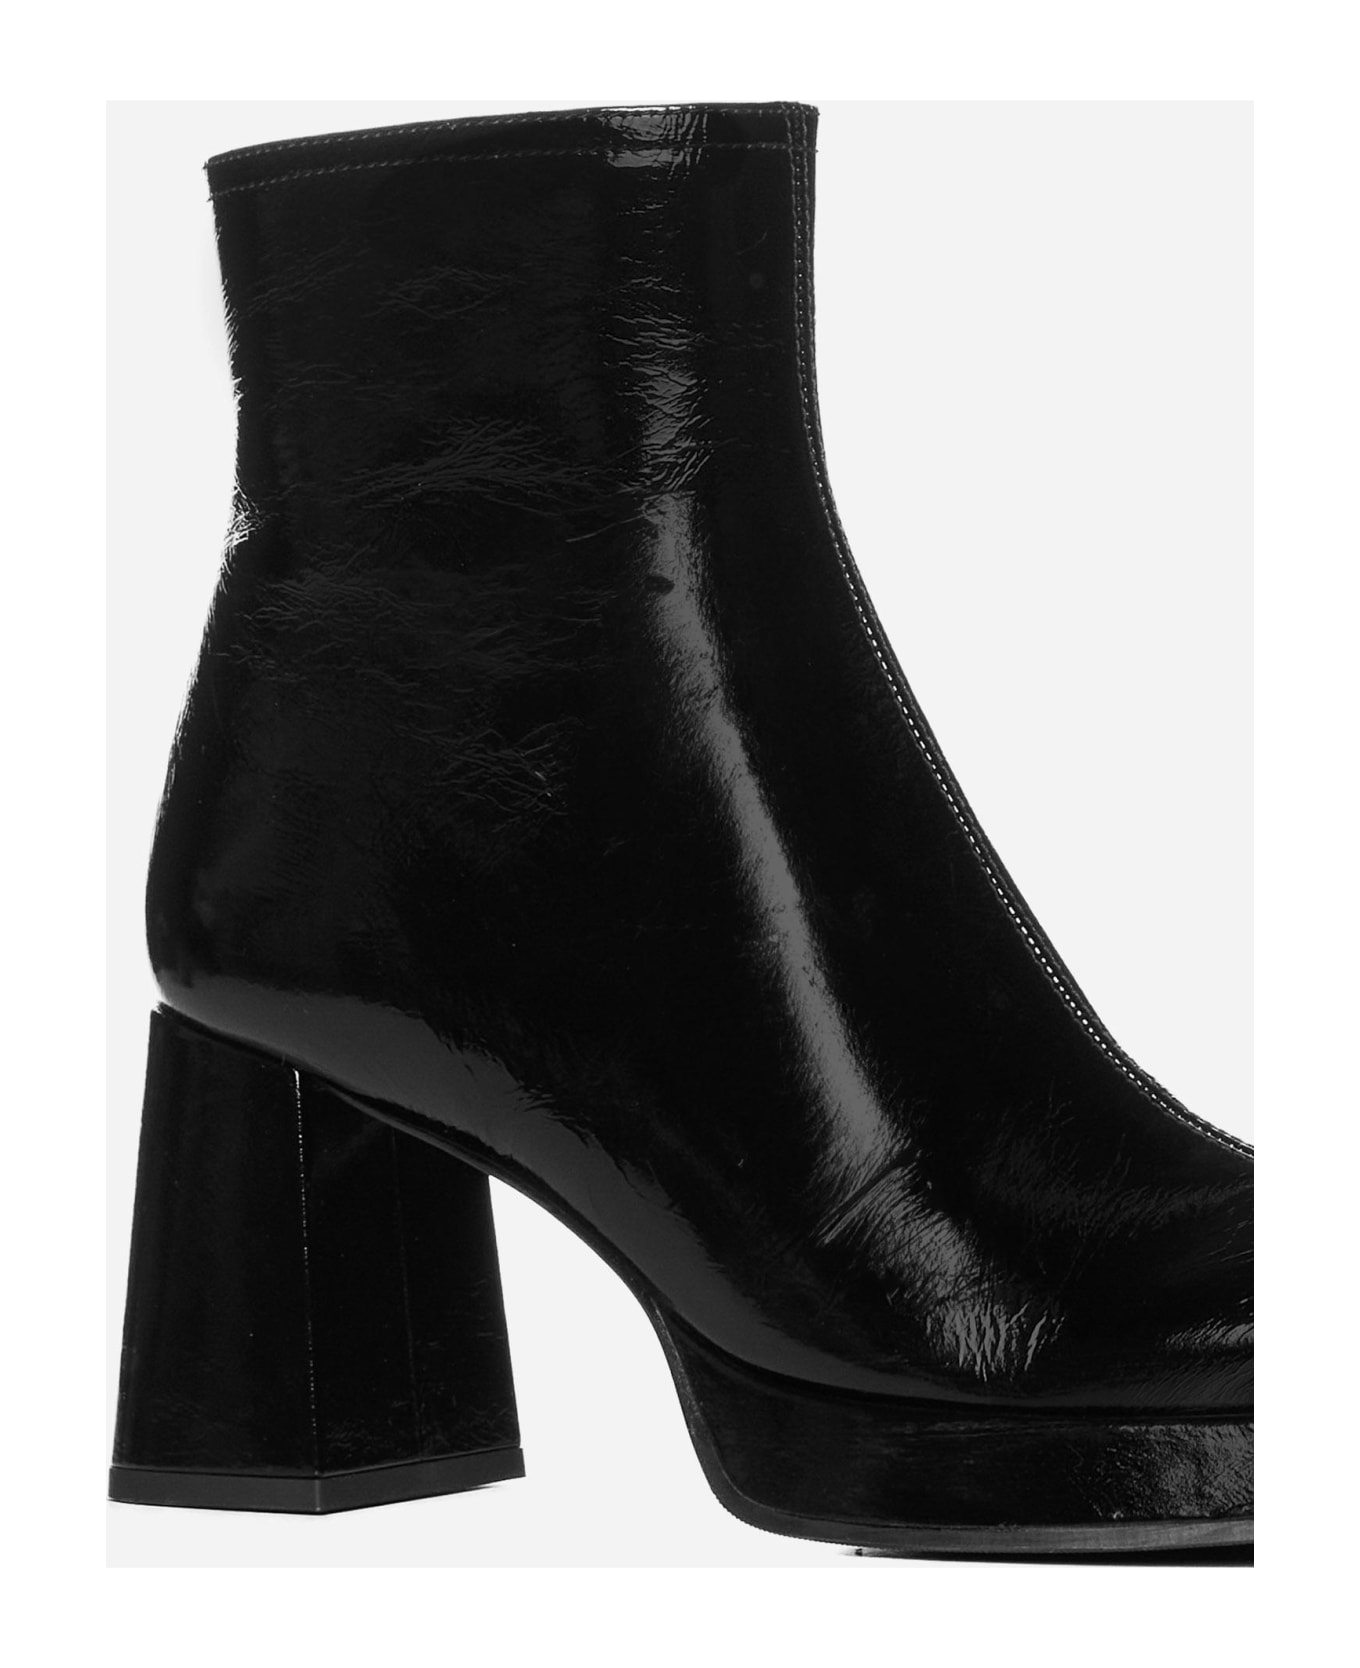 Chie Mihara Katrin Patent Leather Ankle Boots - Negro ブーツ